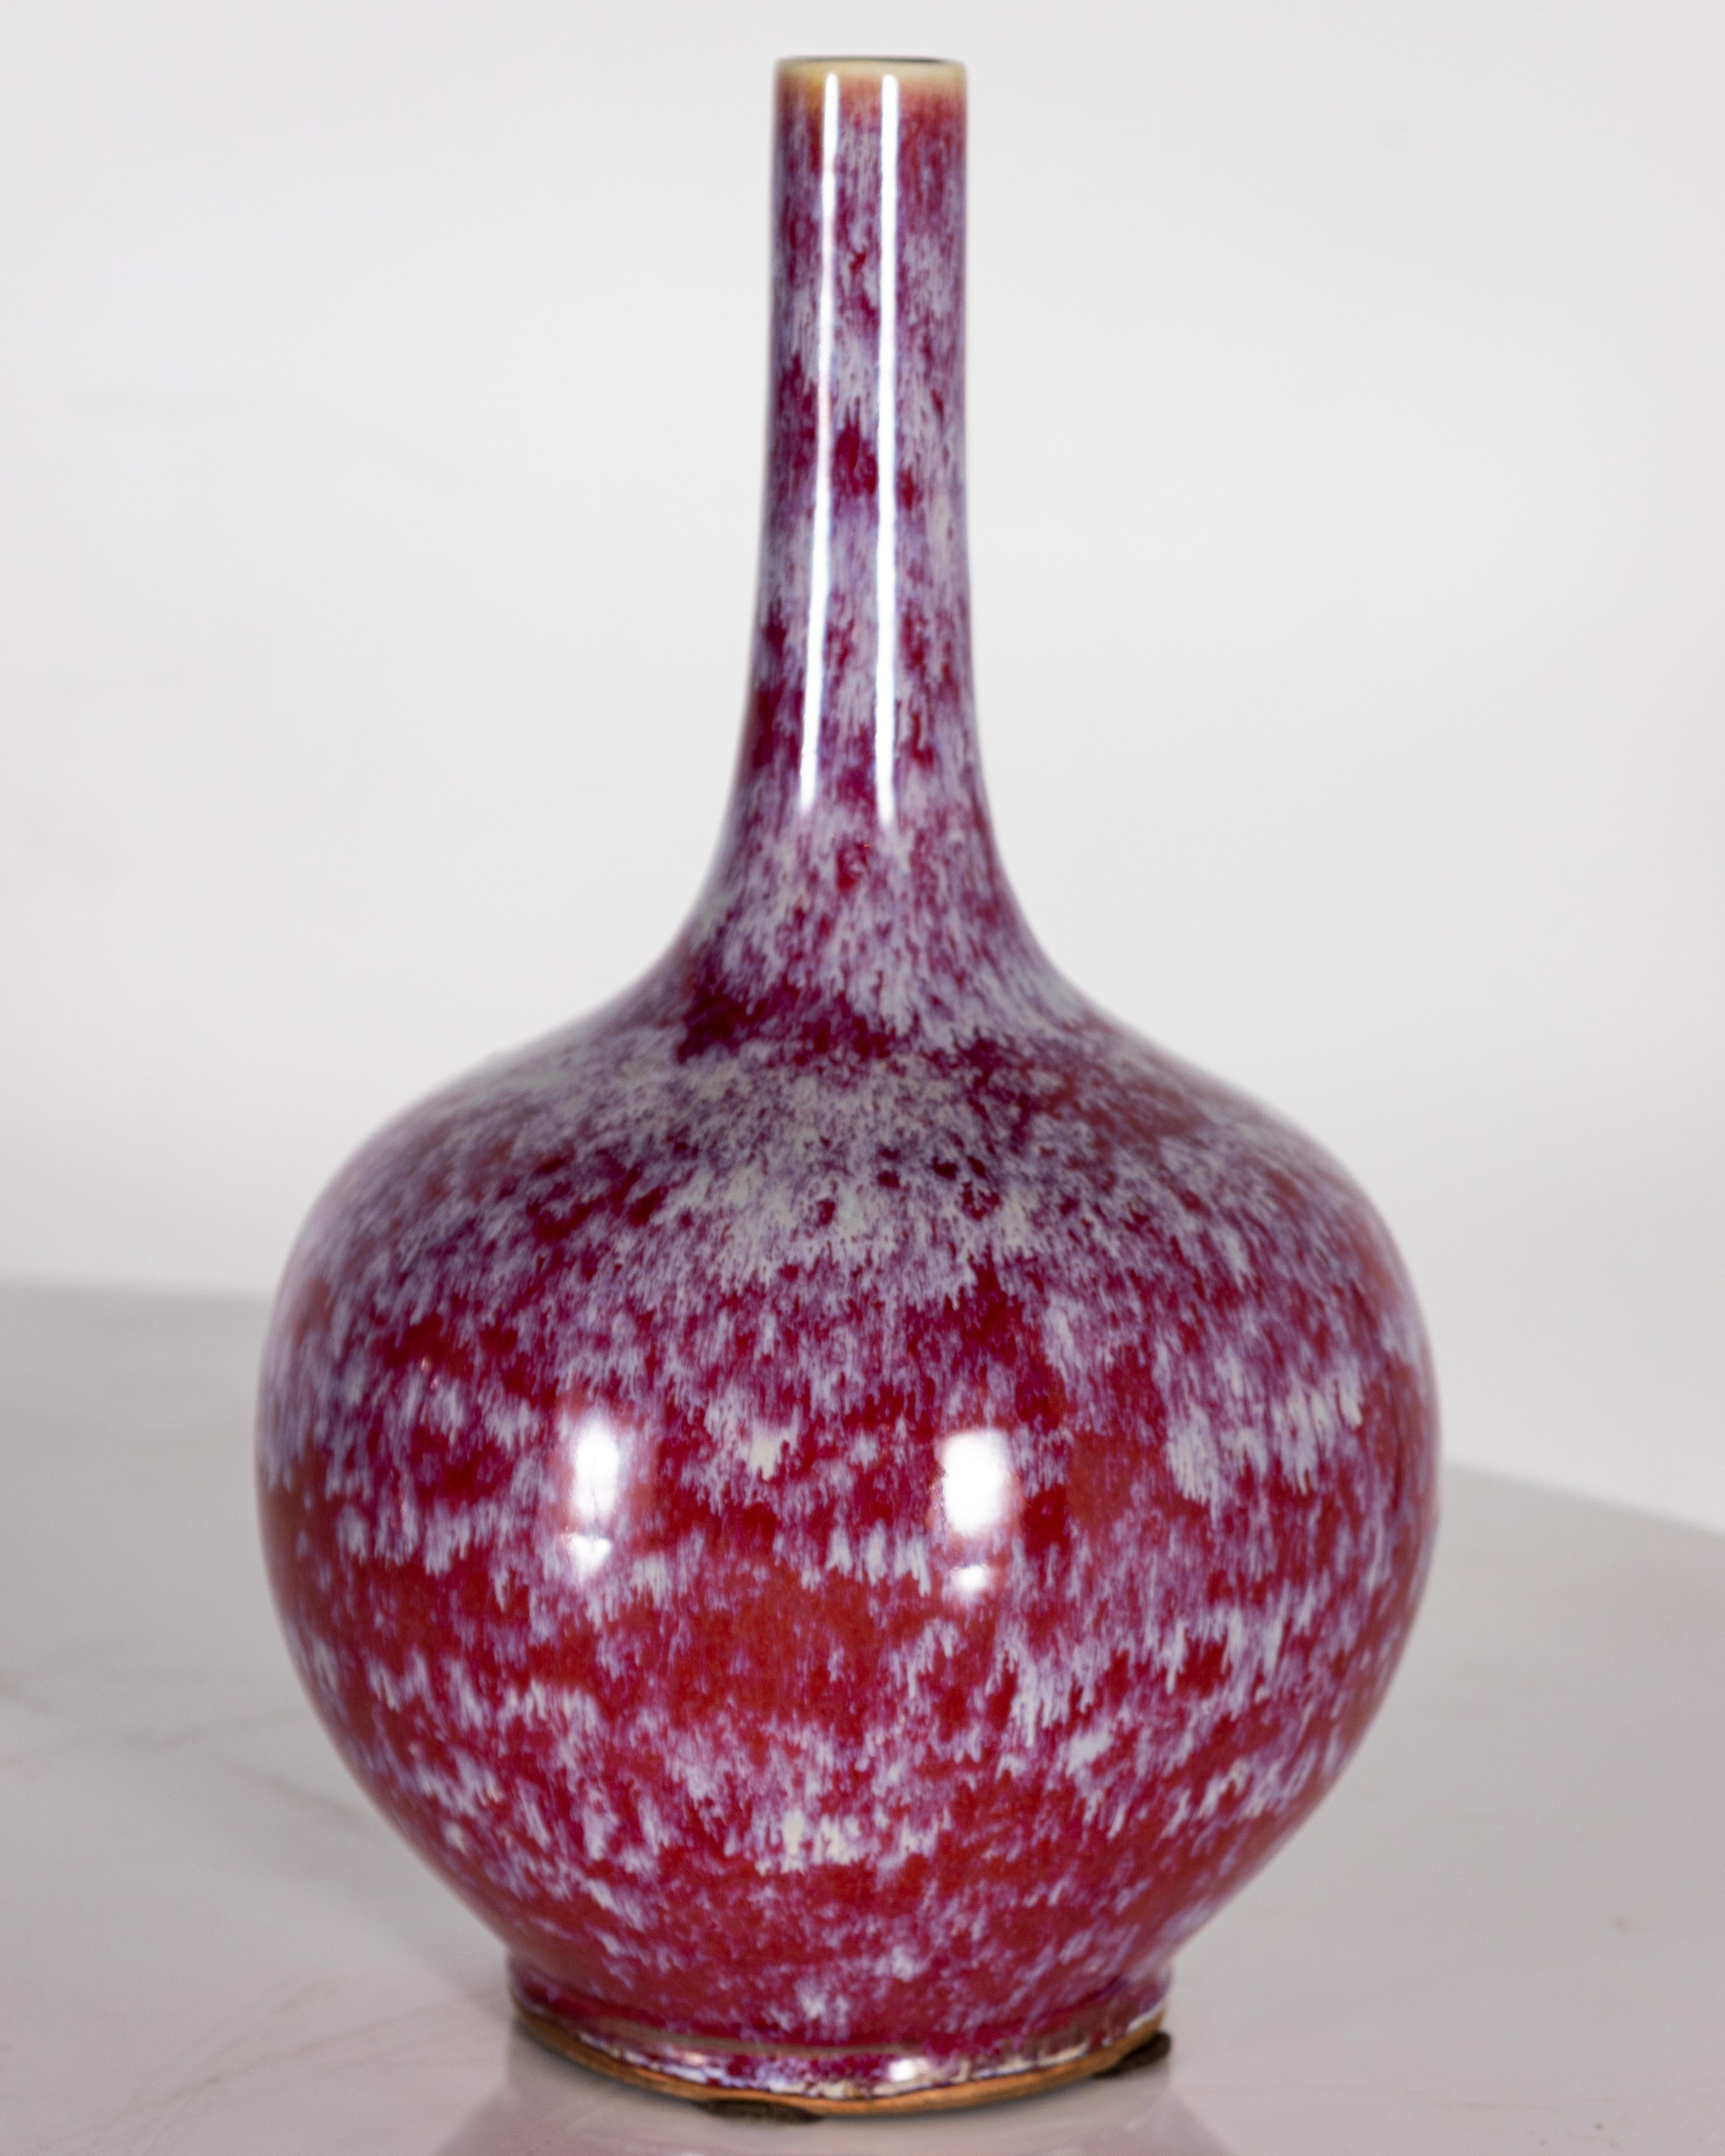 Variegated oxblood glaze Chinese vase.

This piece is a part of Brendan Bass’s one-of-a-kind collection, Le Monde. French for “The World”, the Le Monde collection is made up of rare and hard to find pieces curated by Brendan from estate sales,